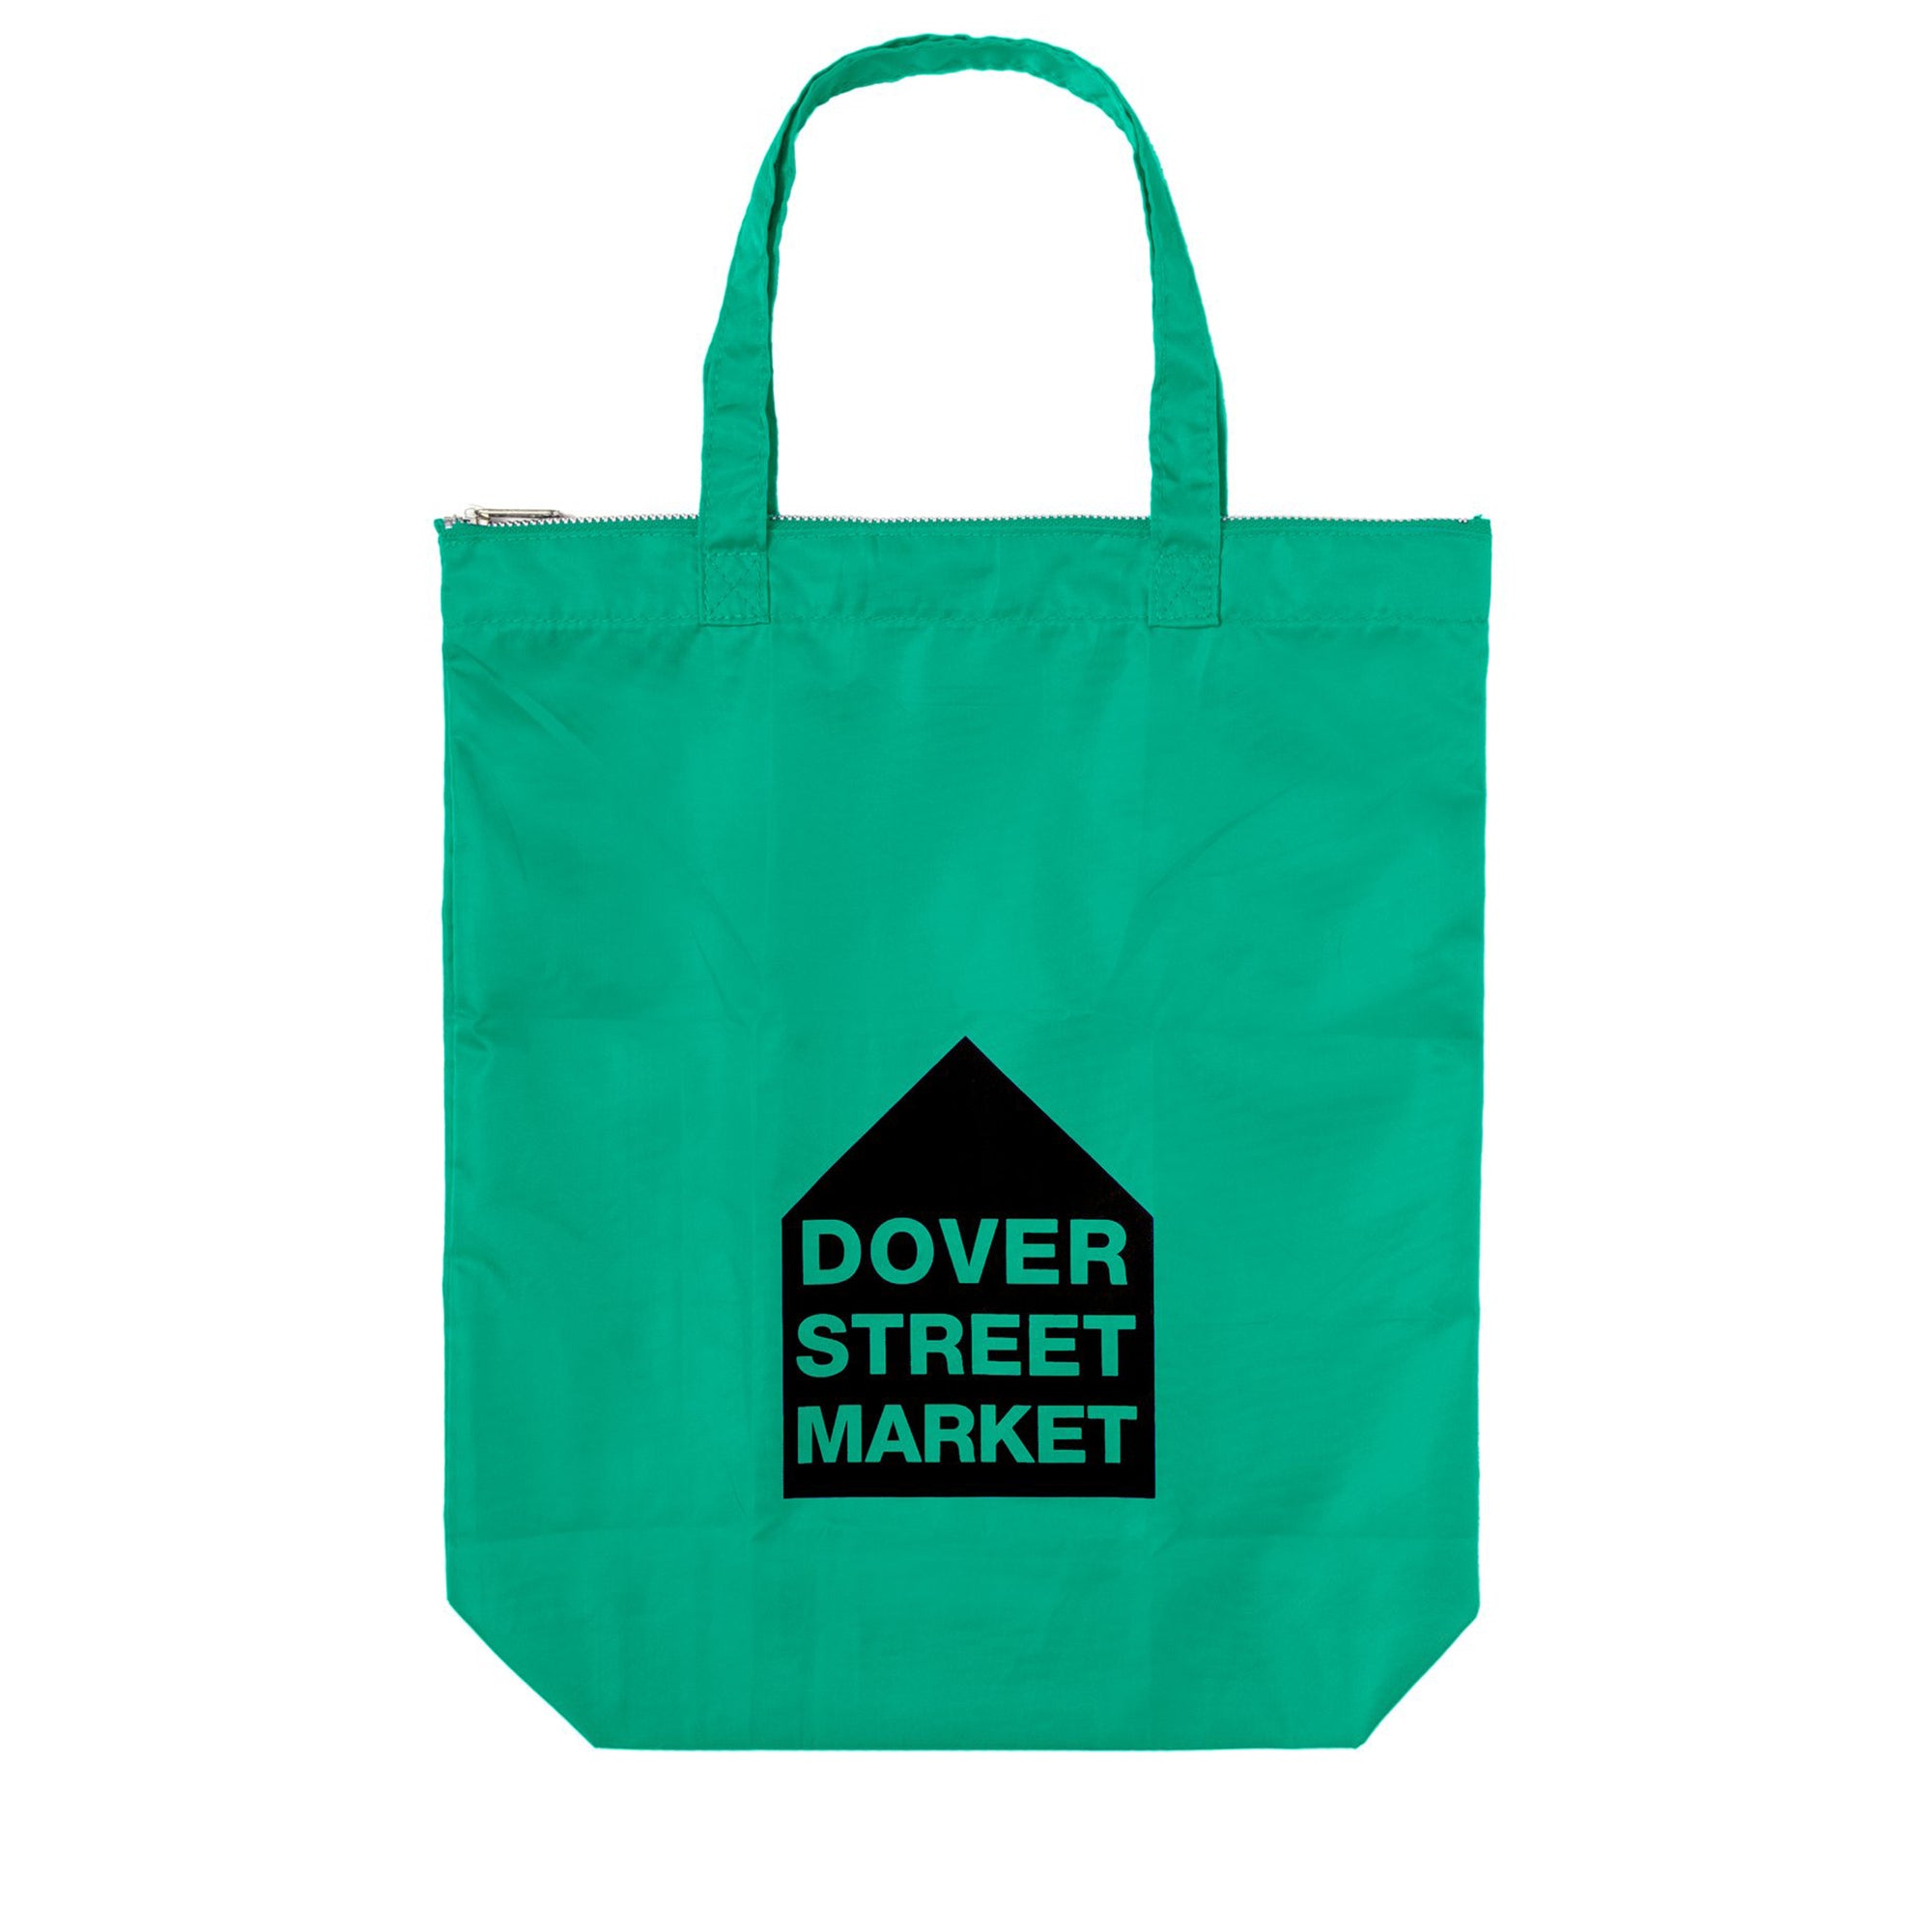 DOVER STREET MARKET - TOTE - (GREEN) view 1